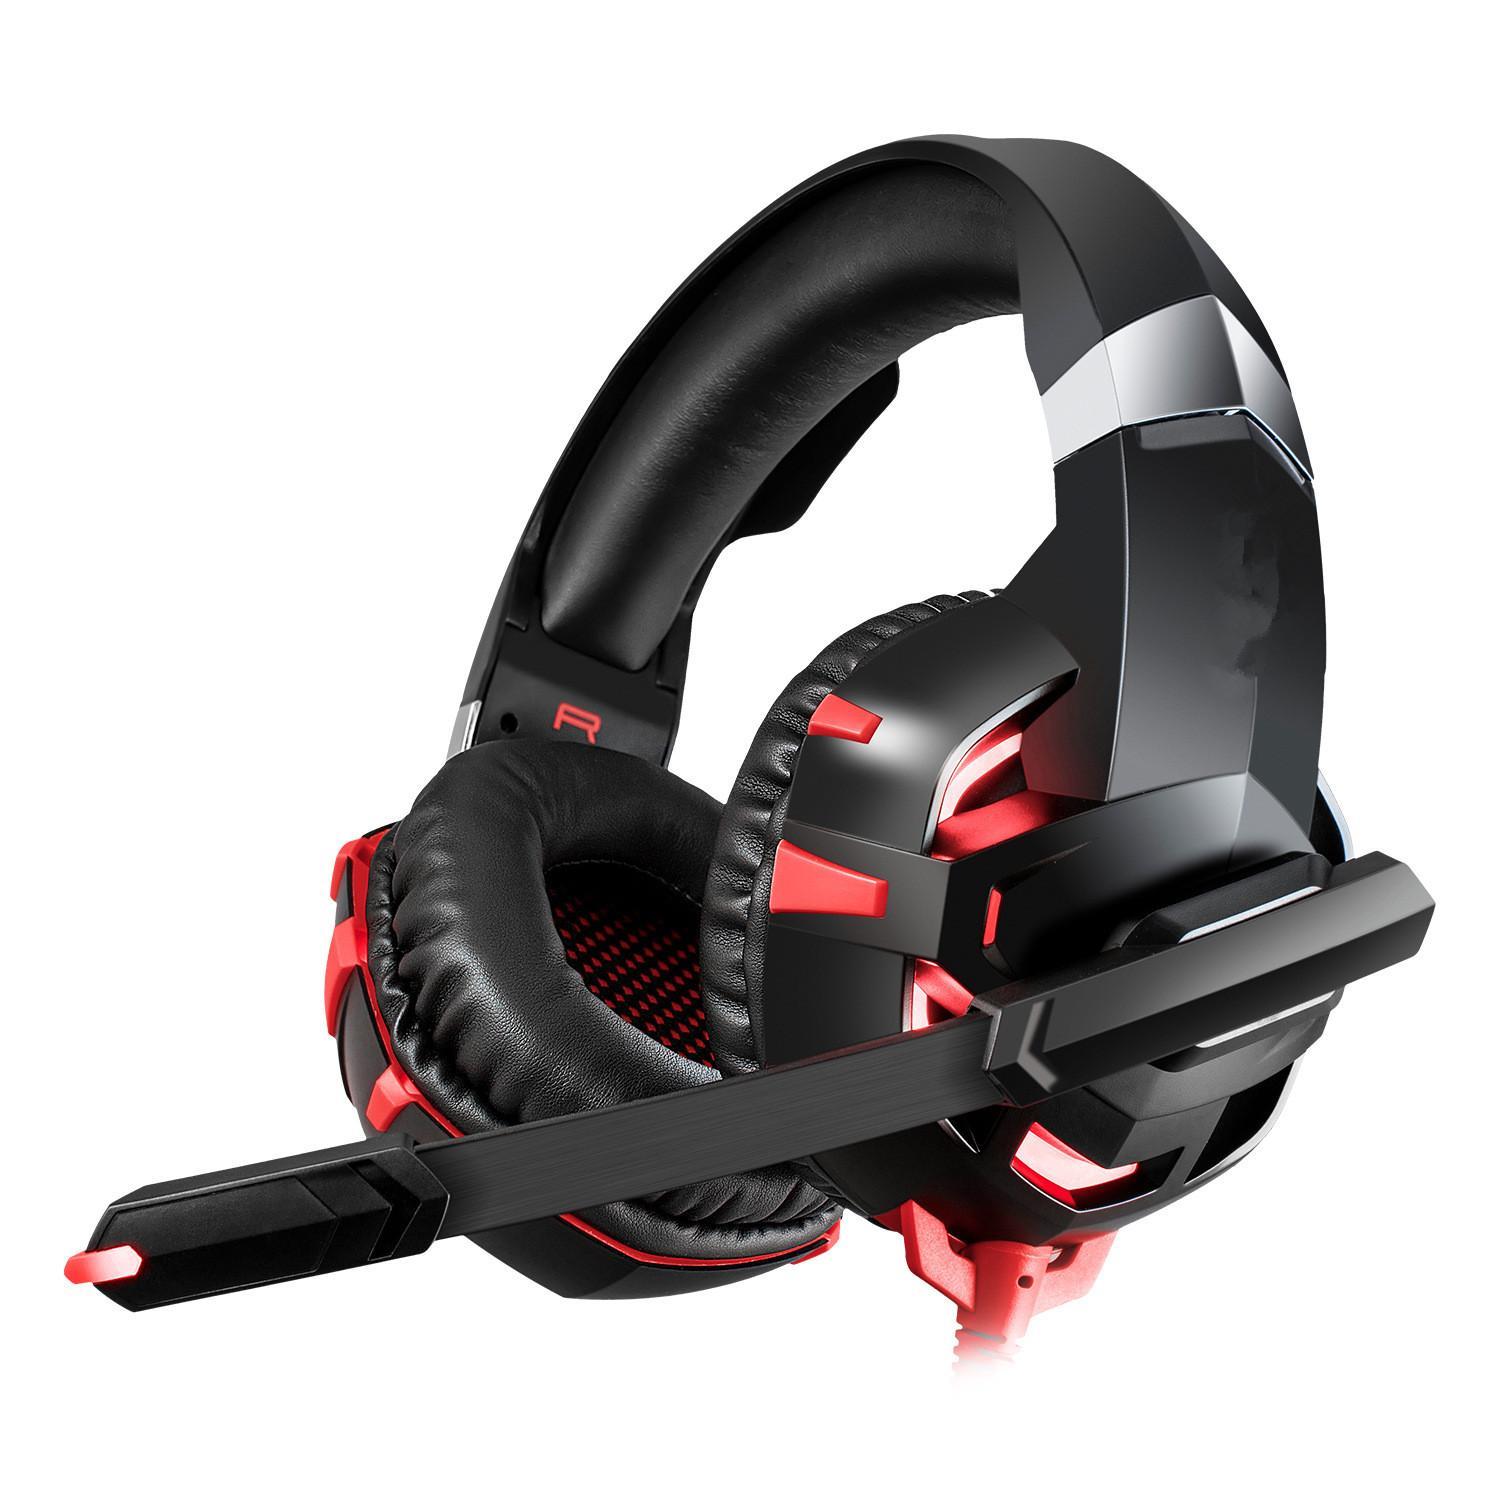 K2 Gaming Over Ear Headset with LED Light and Microphone for PC Computer Laptop Red